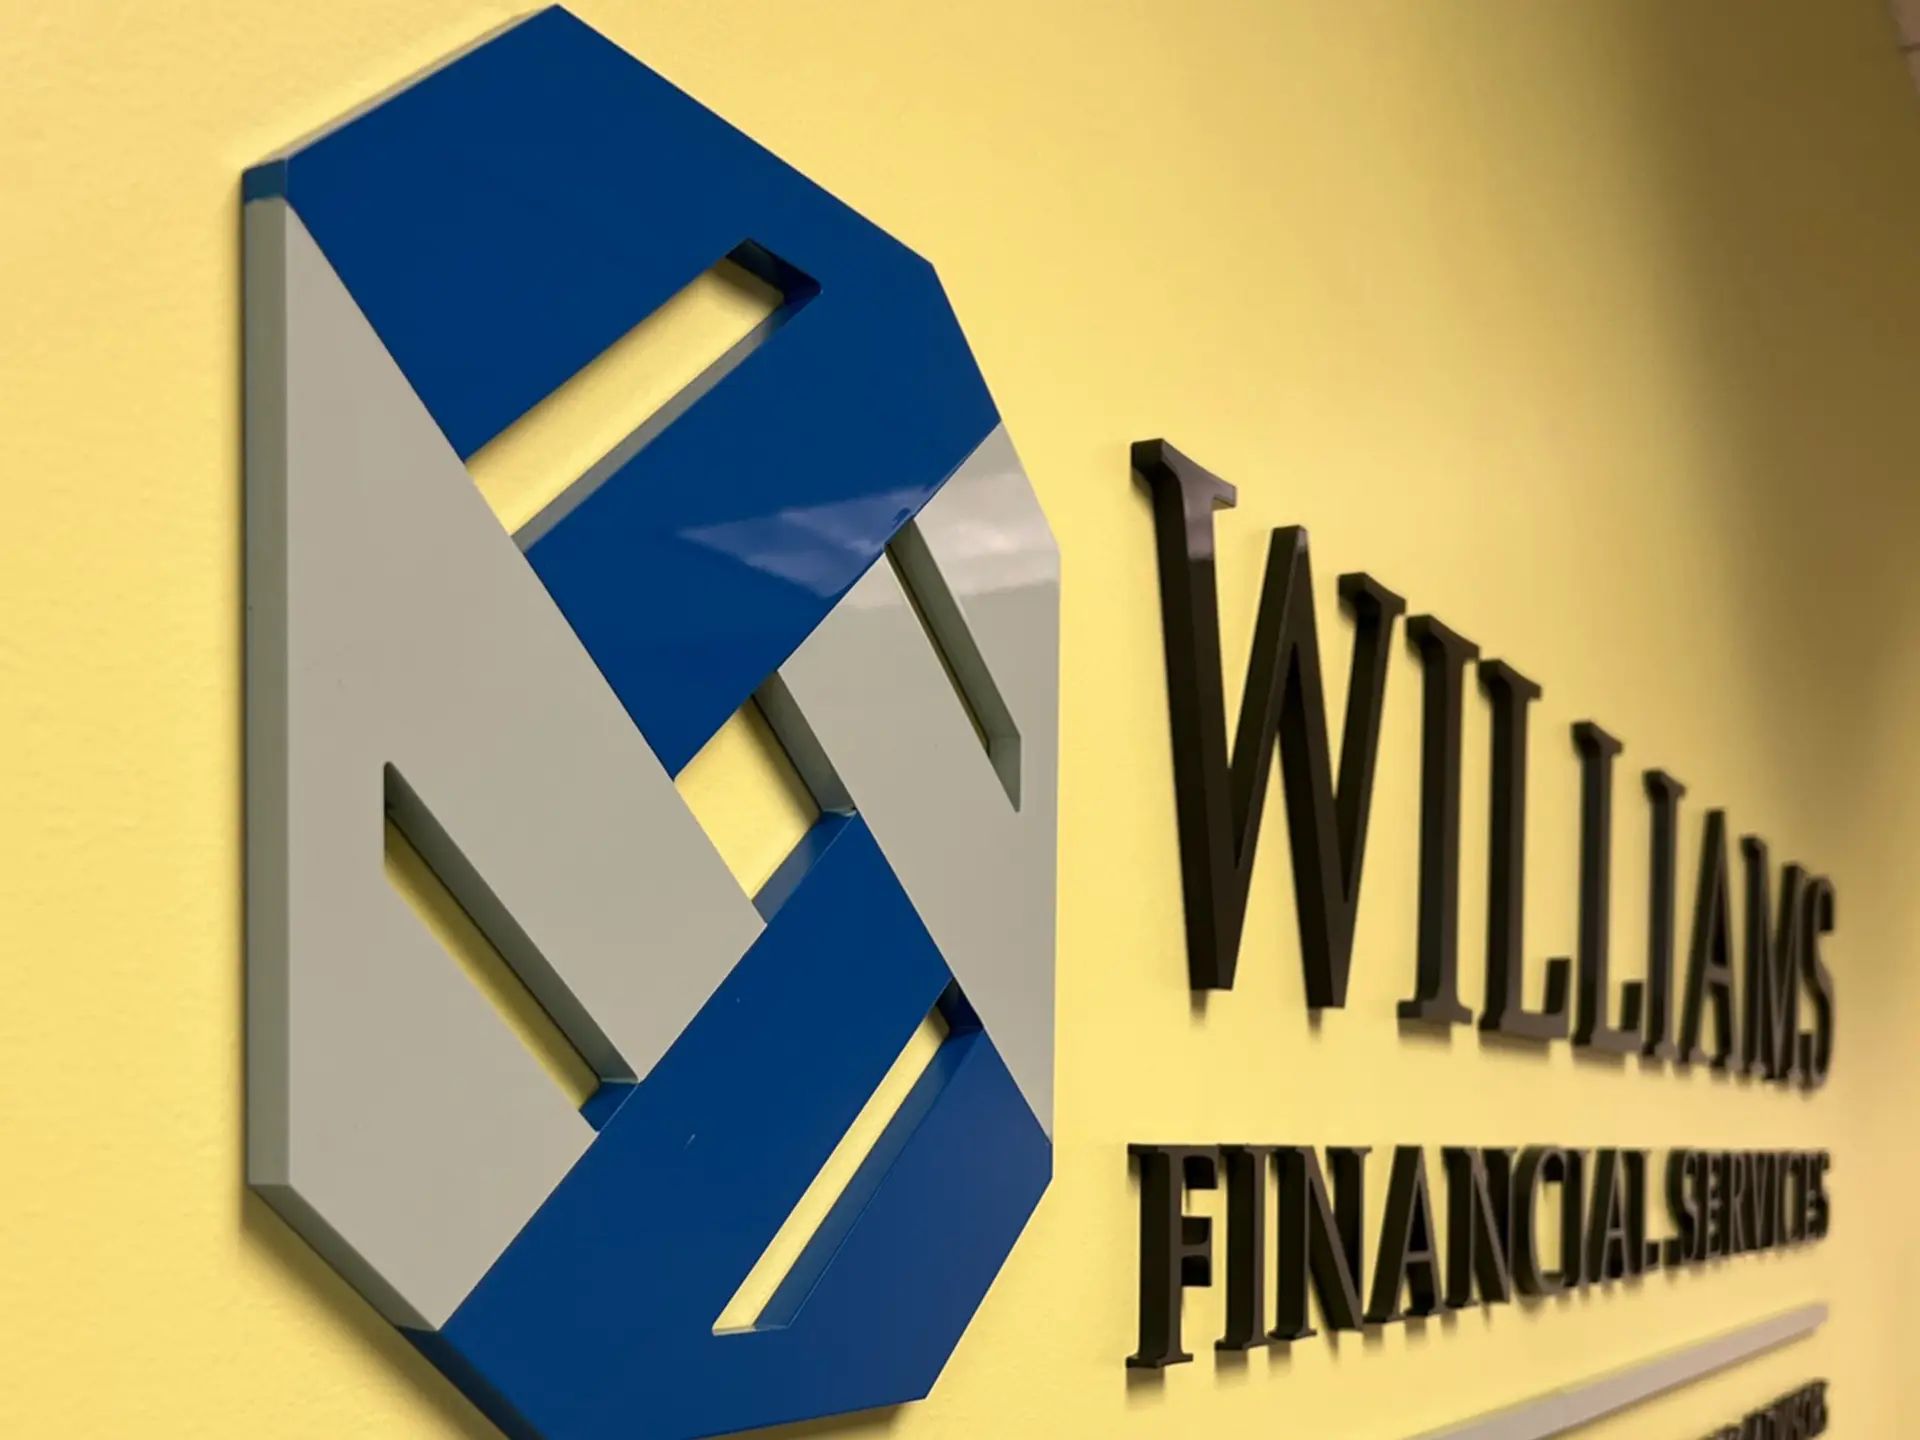 Williams Financial Services